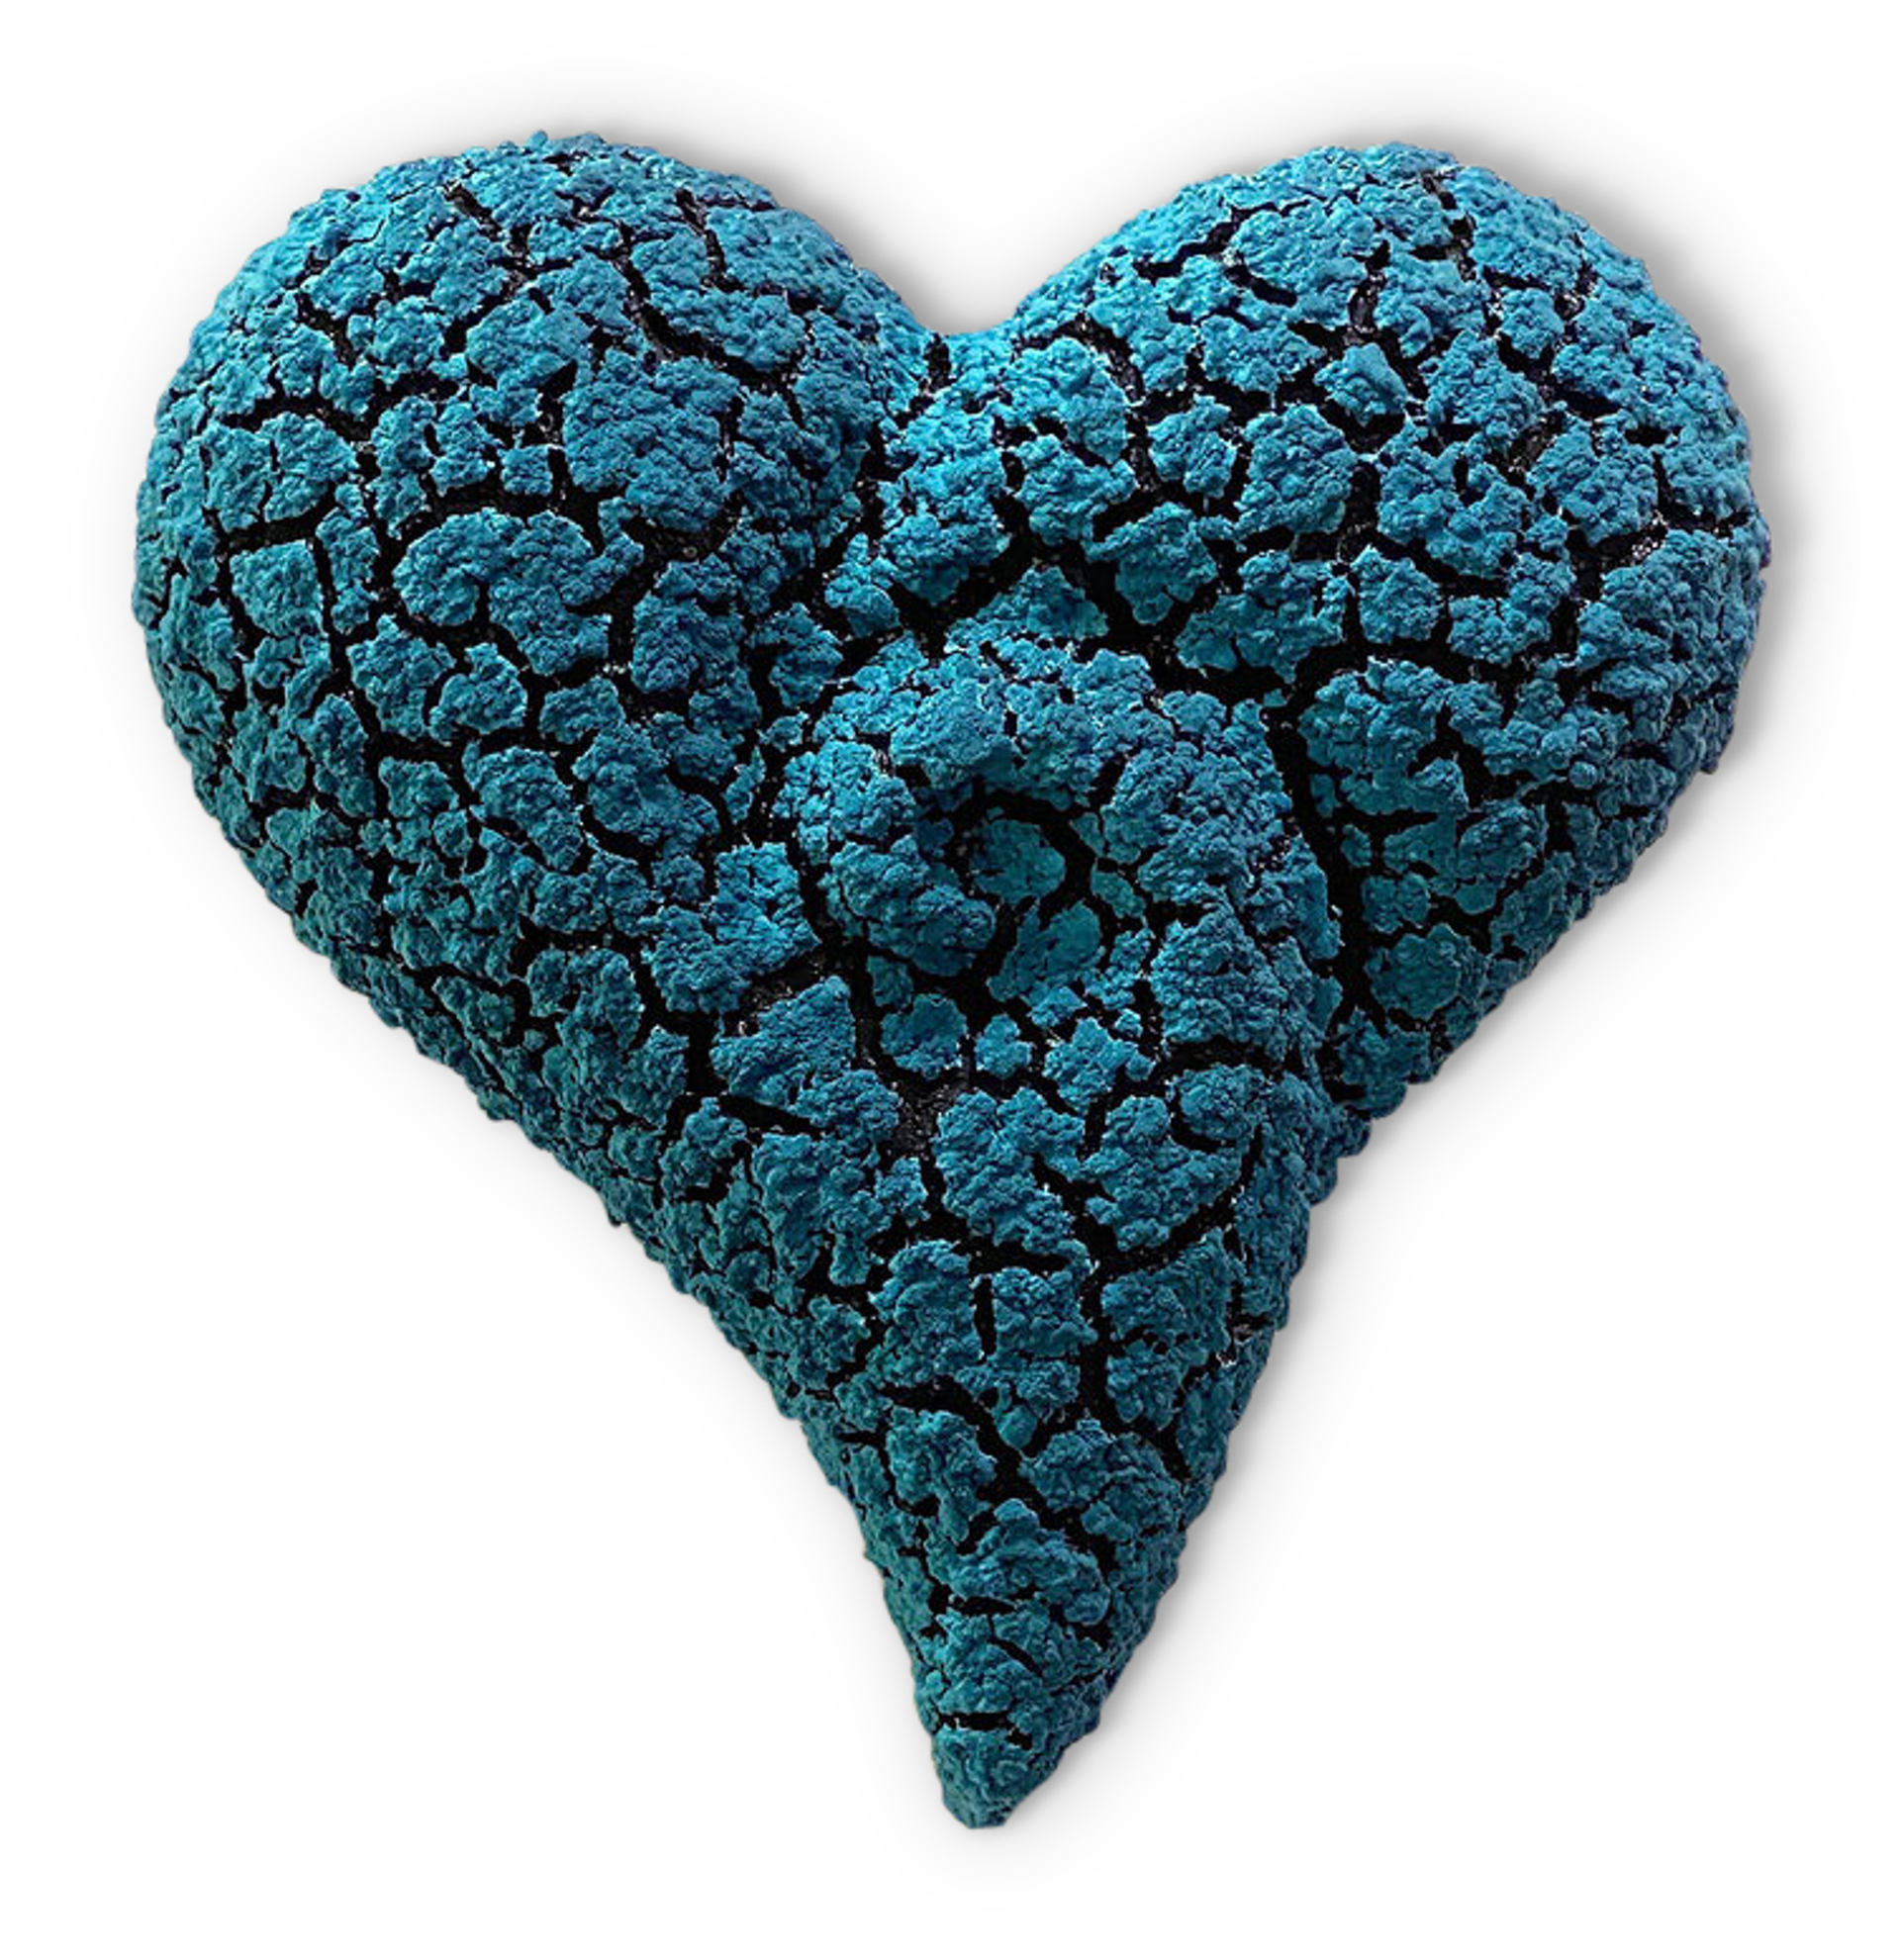 Swirled Lichen Heart ~ Turquoise Green/Peacock Blue by Randy O'Brien